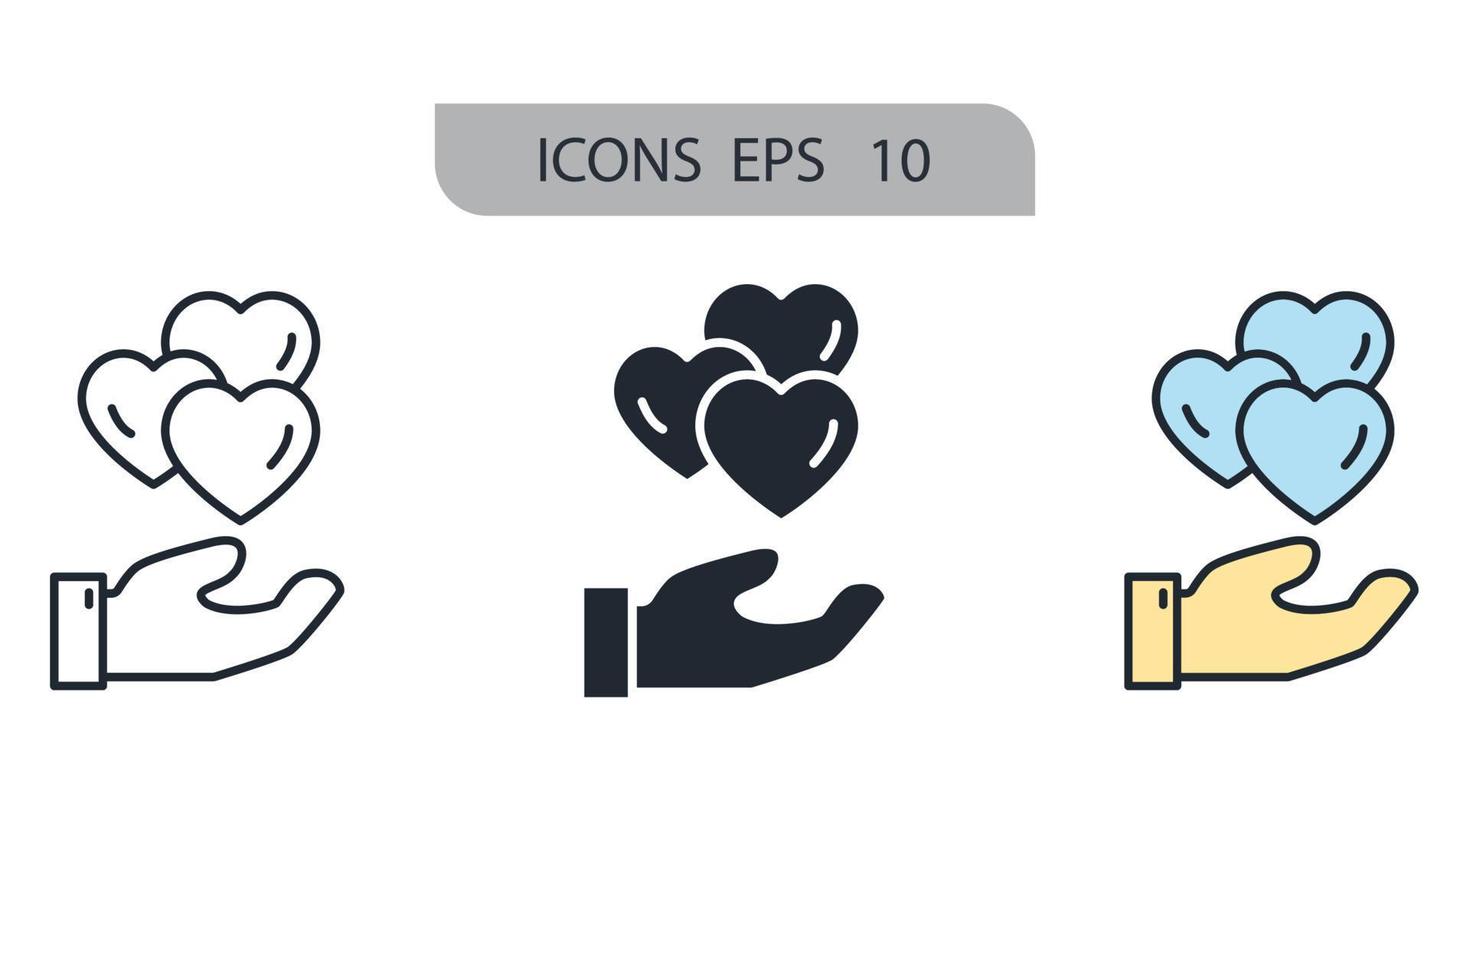 Compassion icons symbol vector elements for infographic web